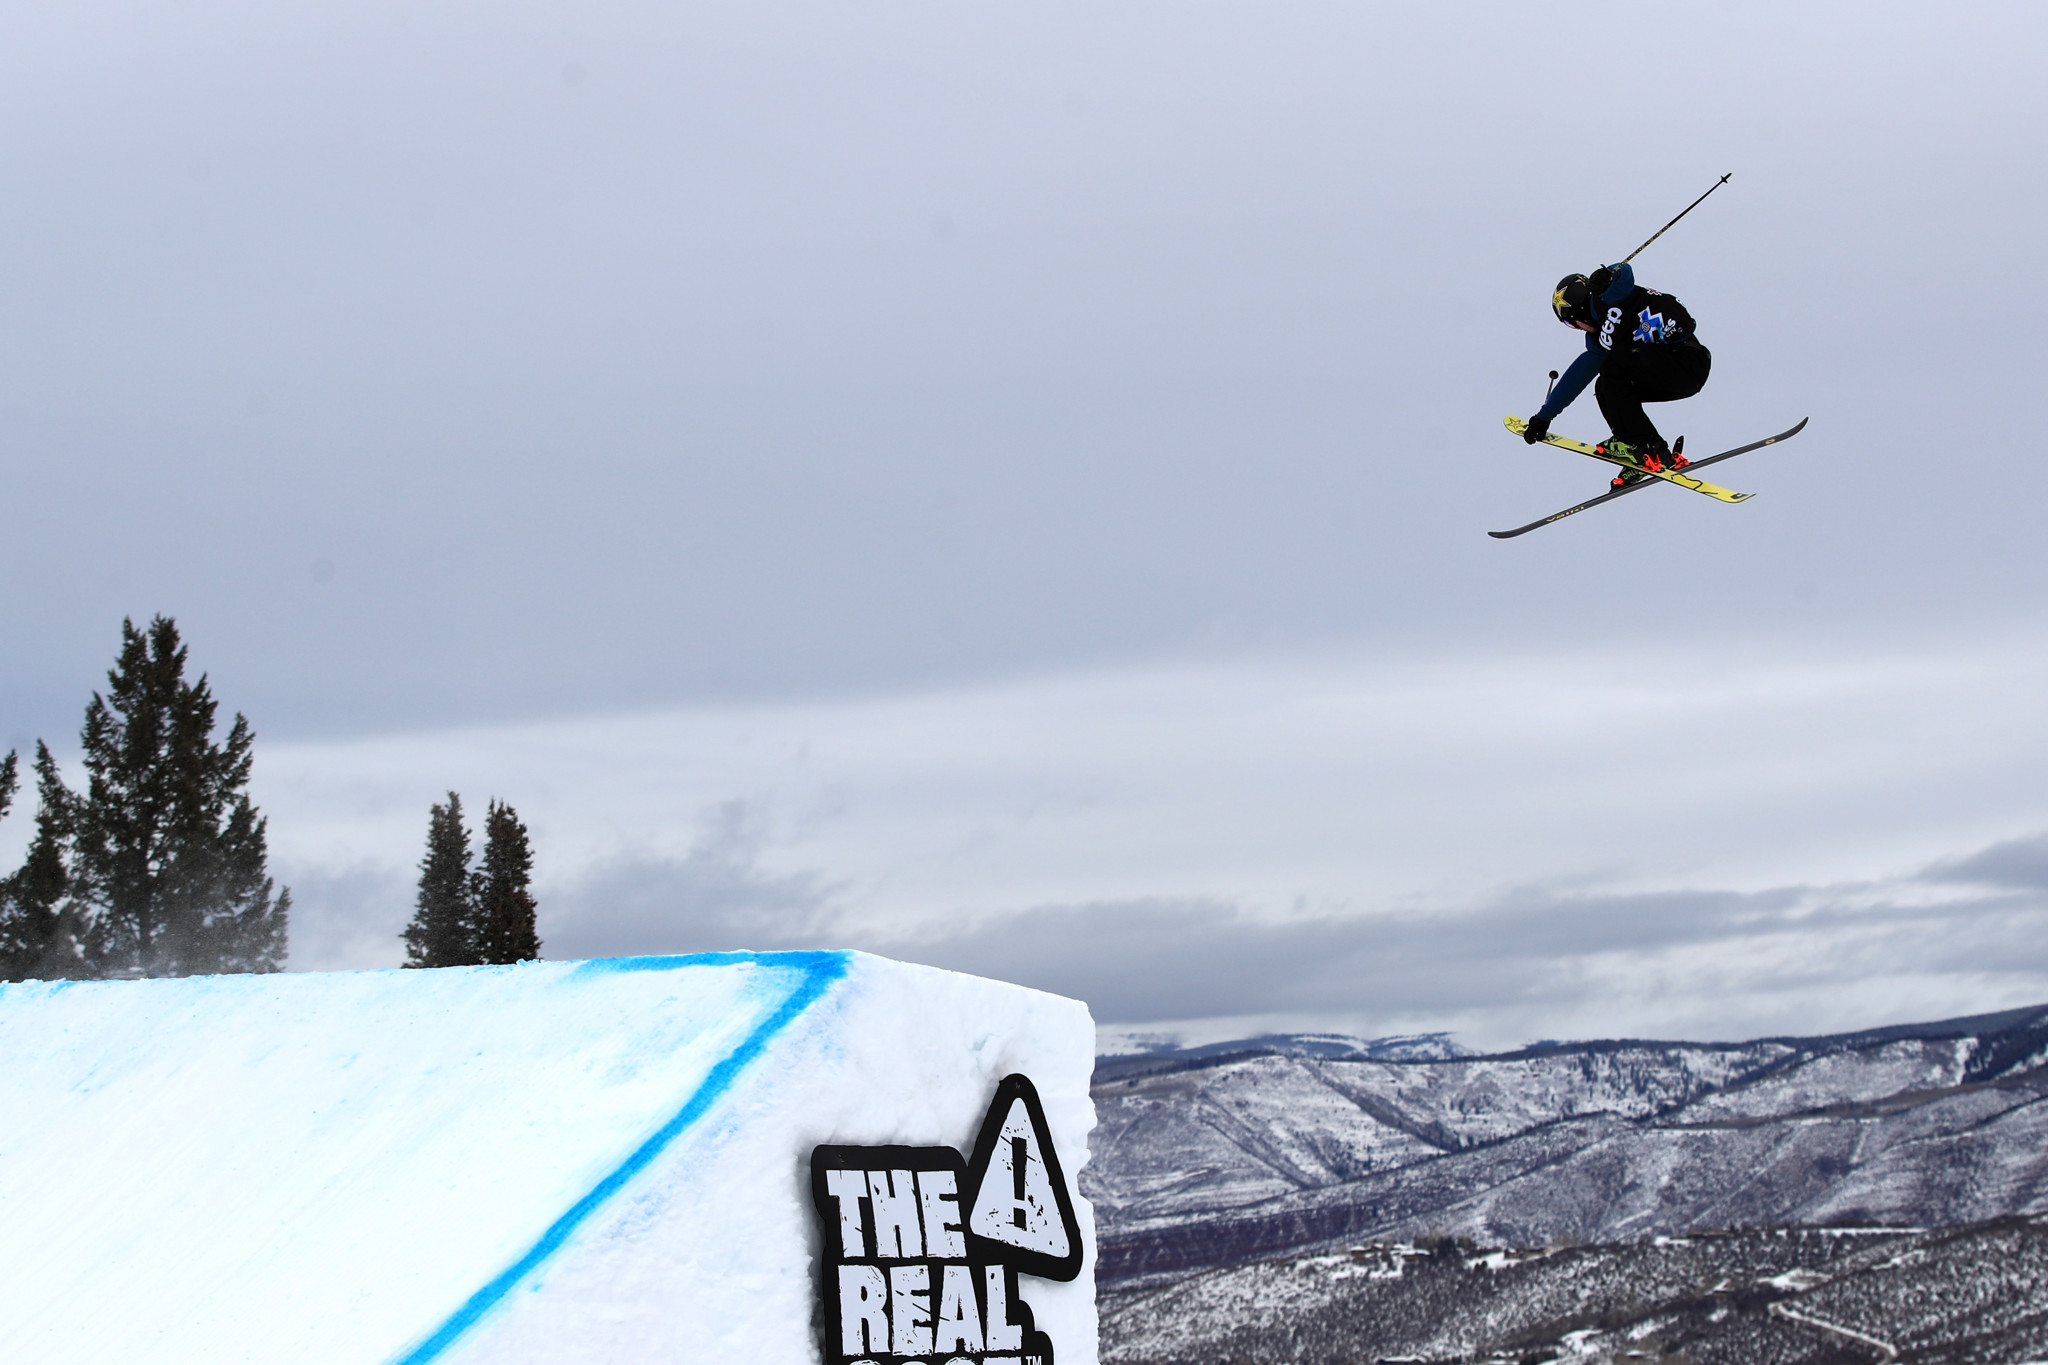 X Games Aspen returns for 21st consecutive year with US athletes looking to continue success